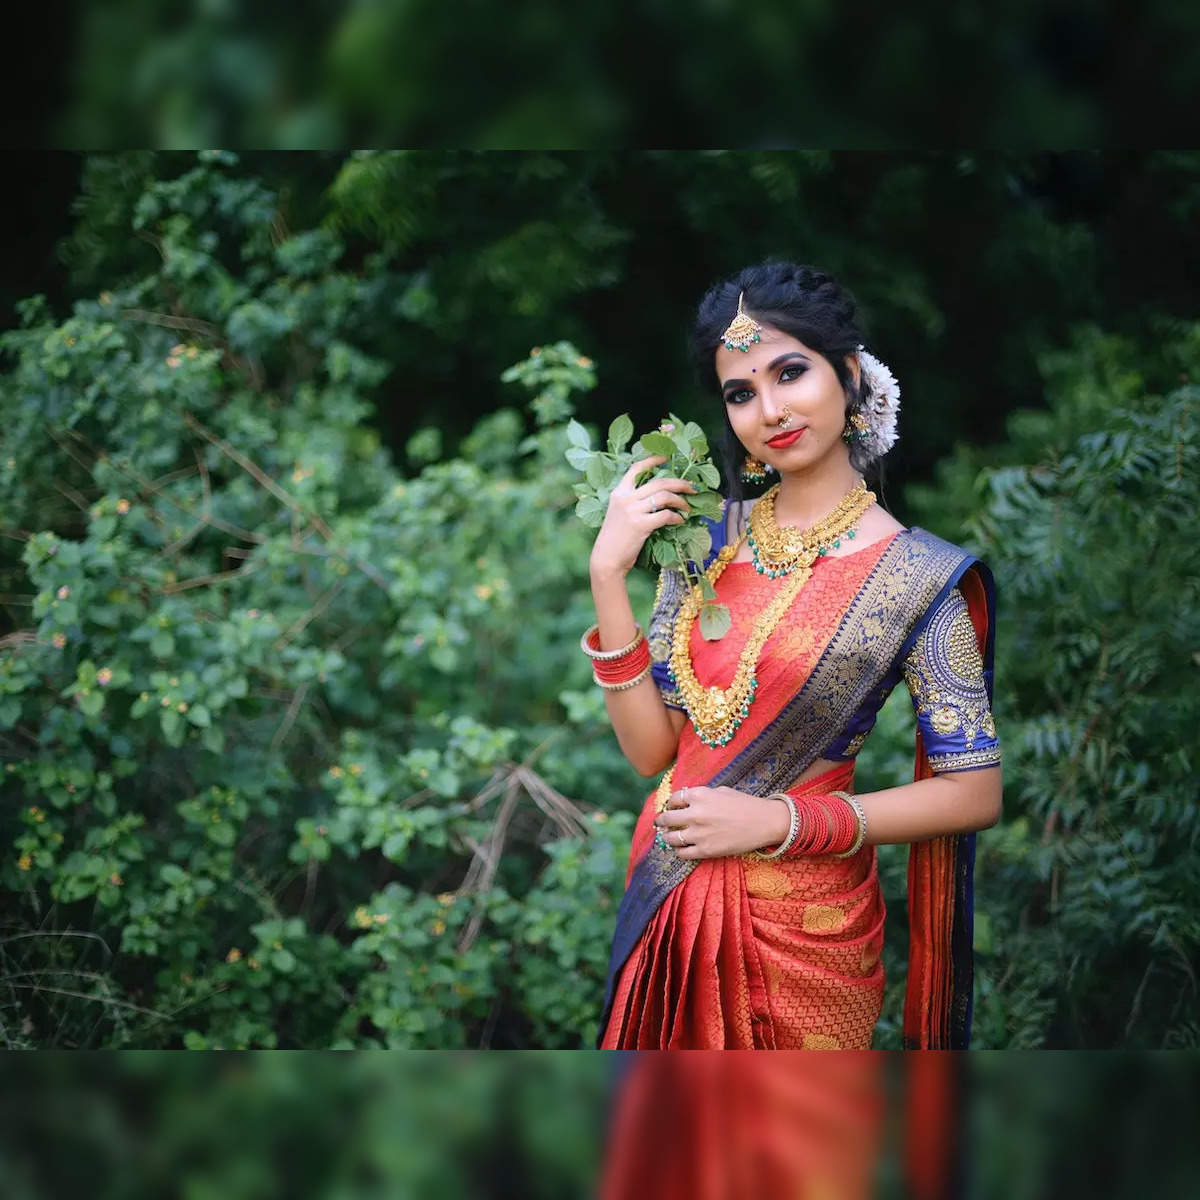 Image of Indian traditional Beautiful Woman Wearing an traditional Saree  And Posing On The Outdoor With a Smile Face-US485157-Picxy